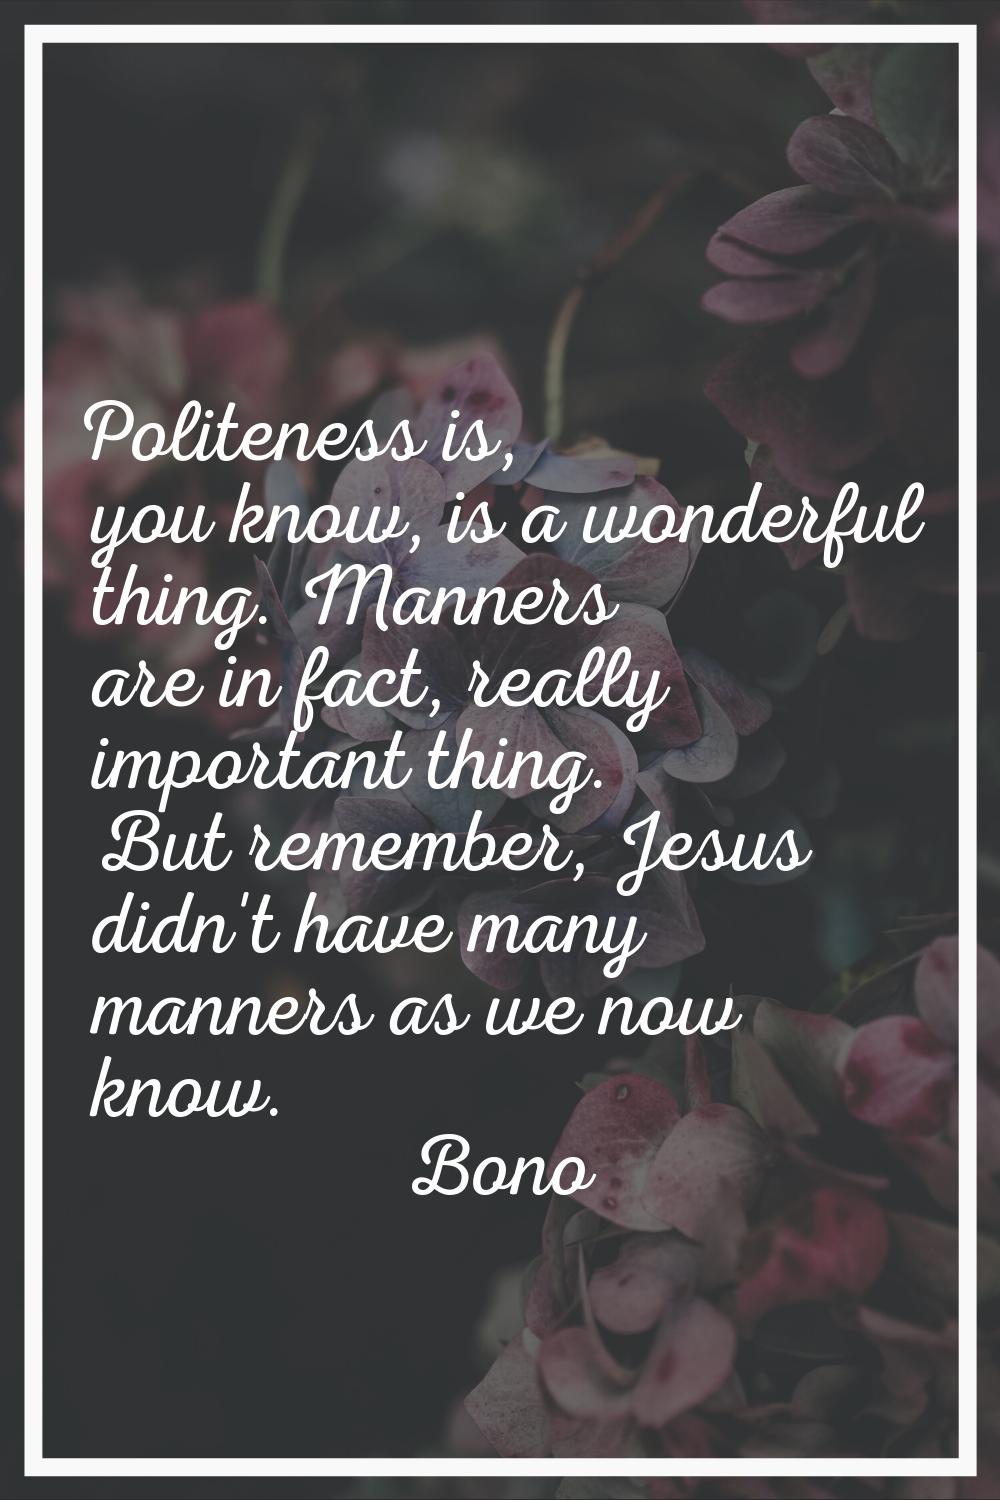 Politeness is, you know, is a wonderful thing. Manners are in fact, really important thing. But rem